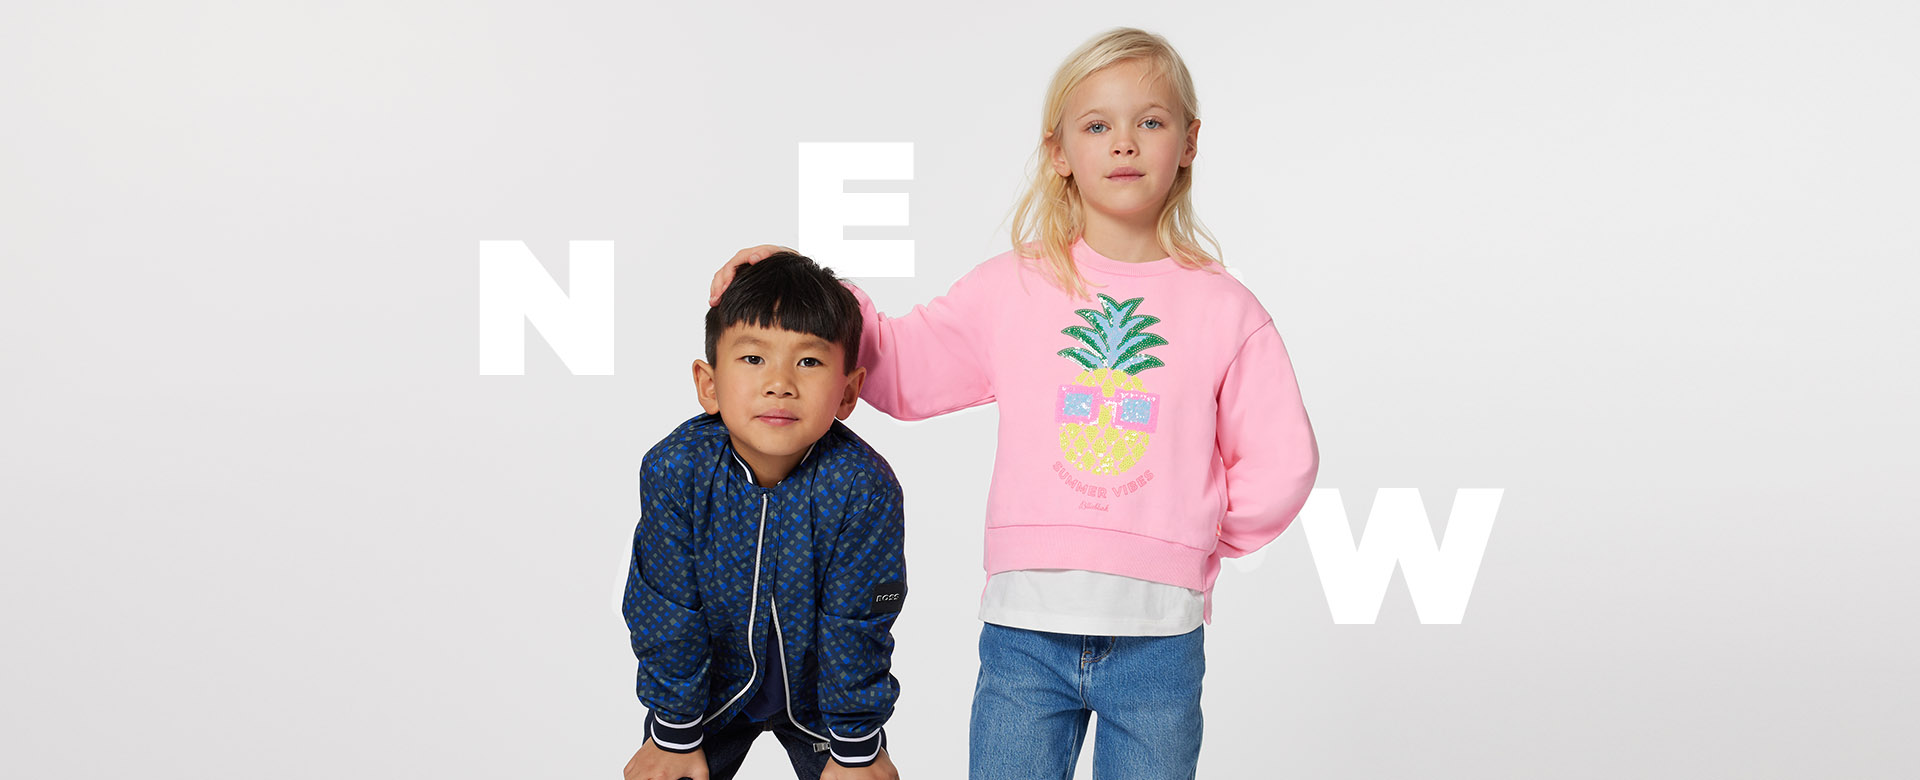 The Spring/Summer collections have arrived at Kids around